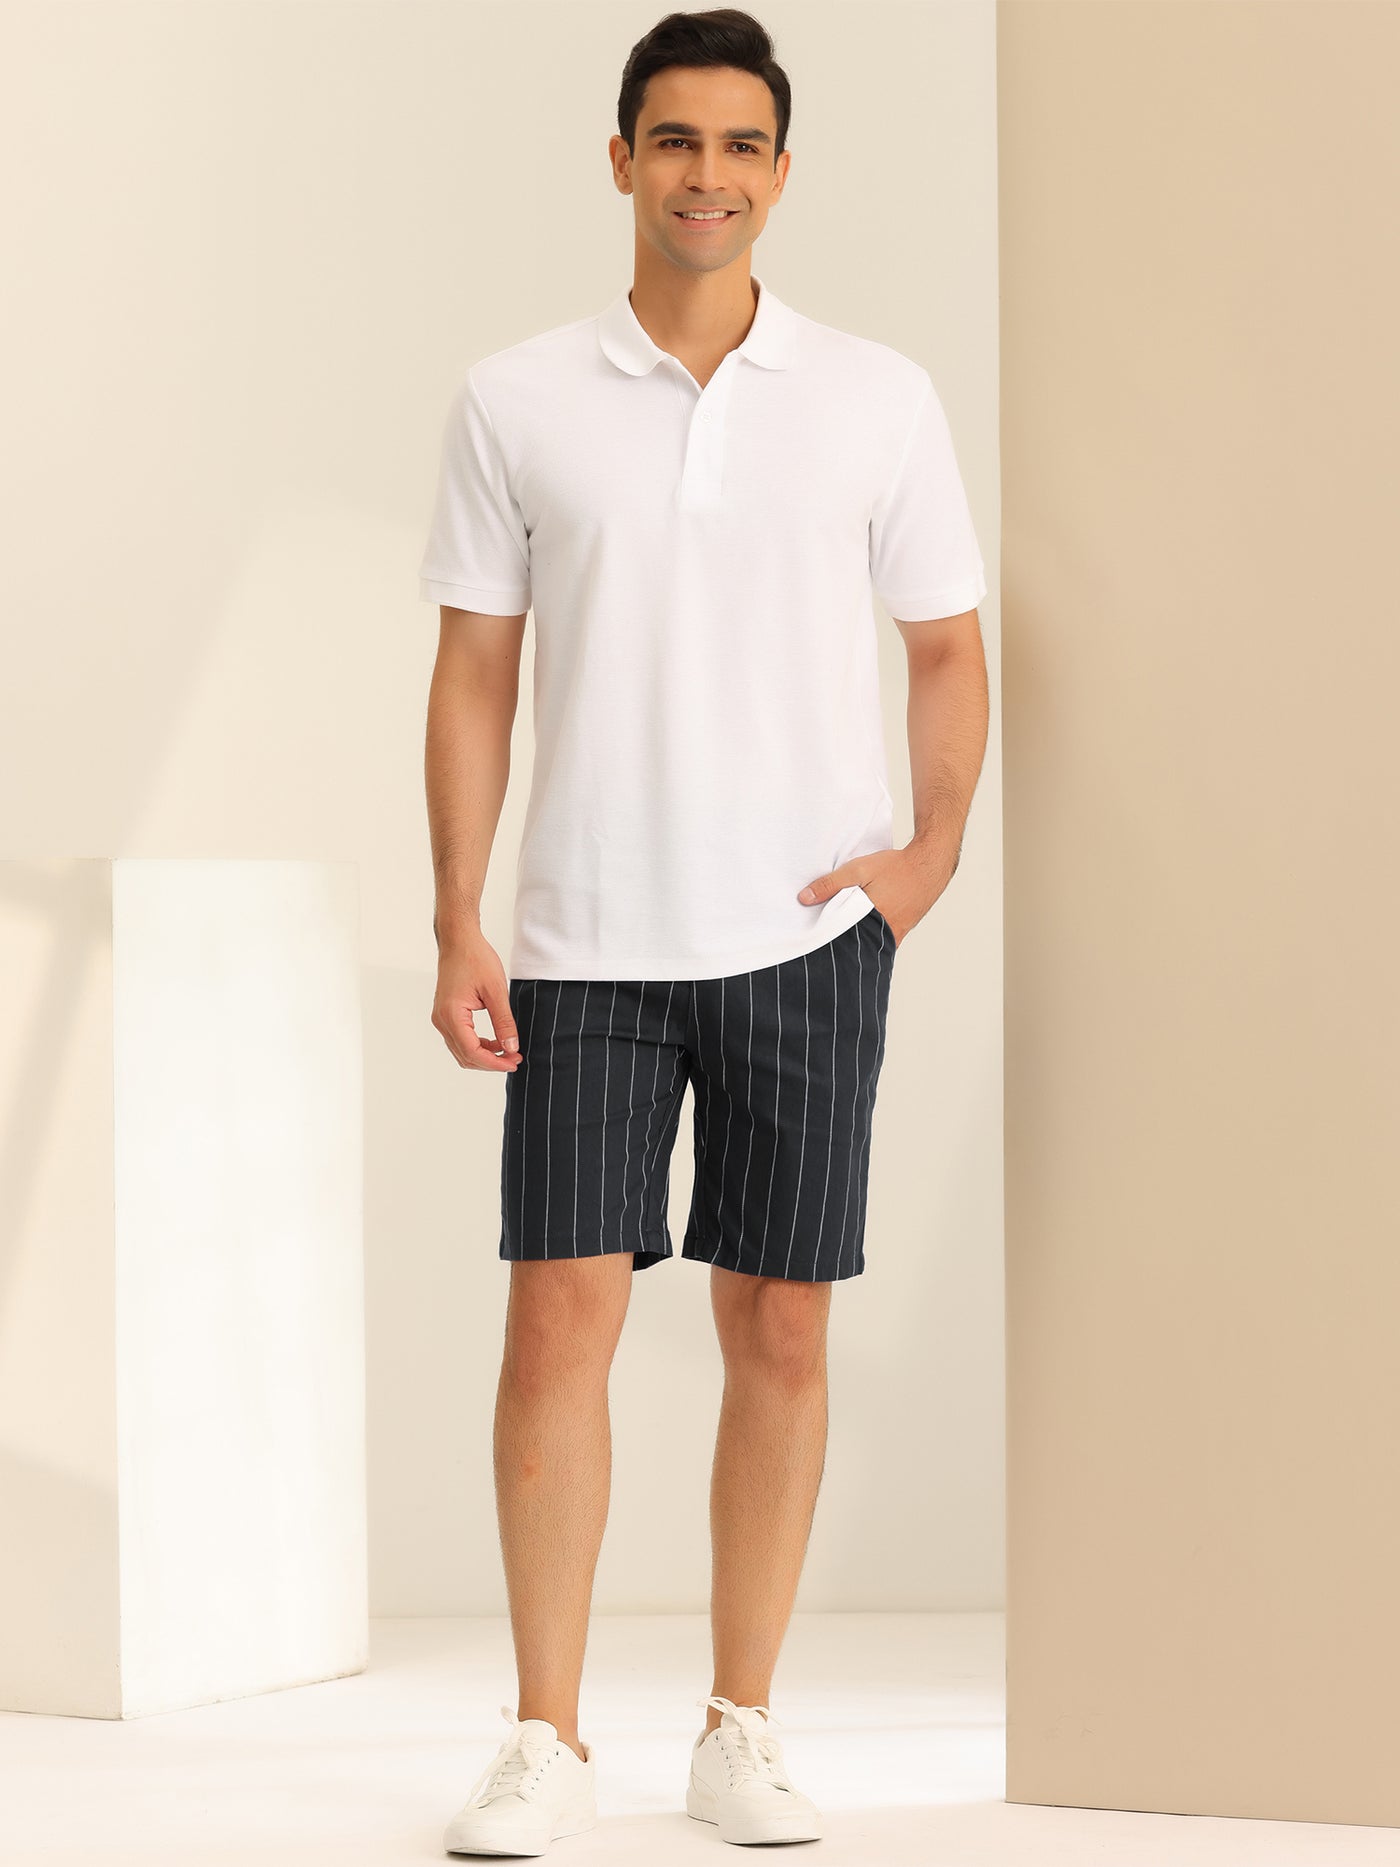 Bublédon Casual Summer Striped Flat Front Chino Shorts